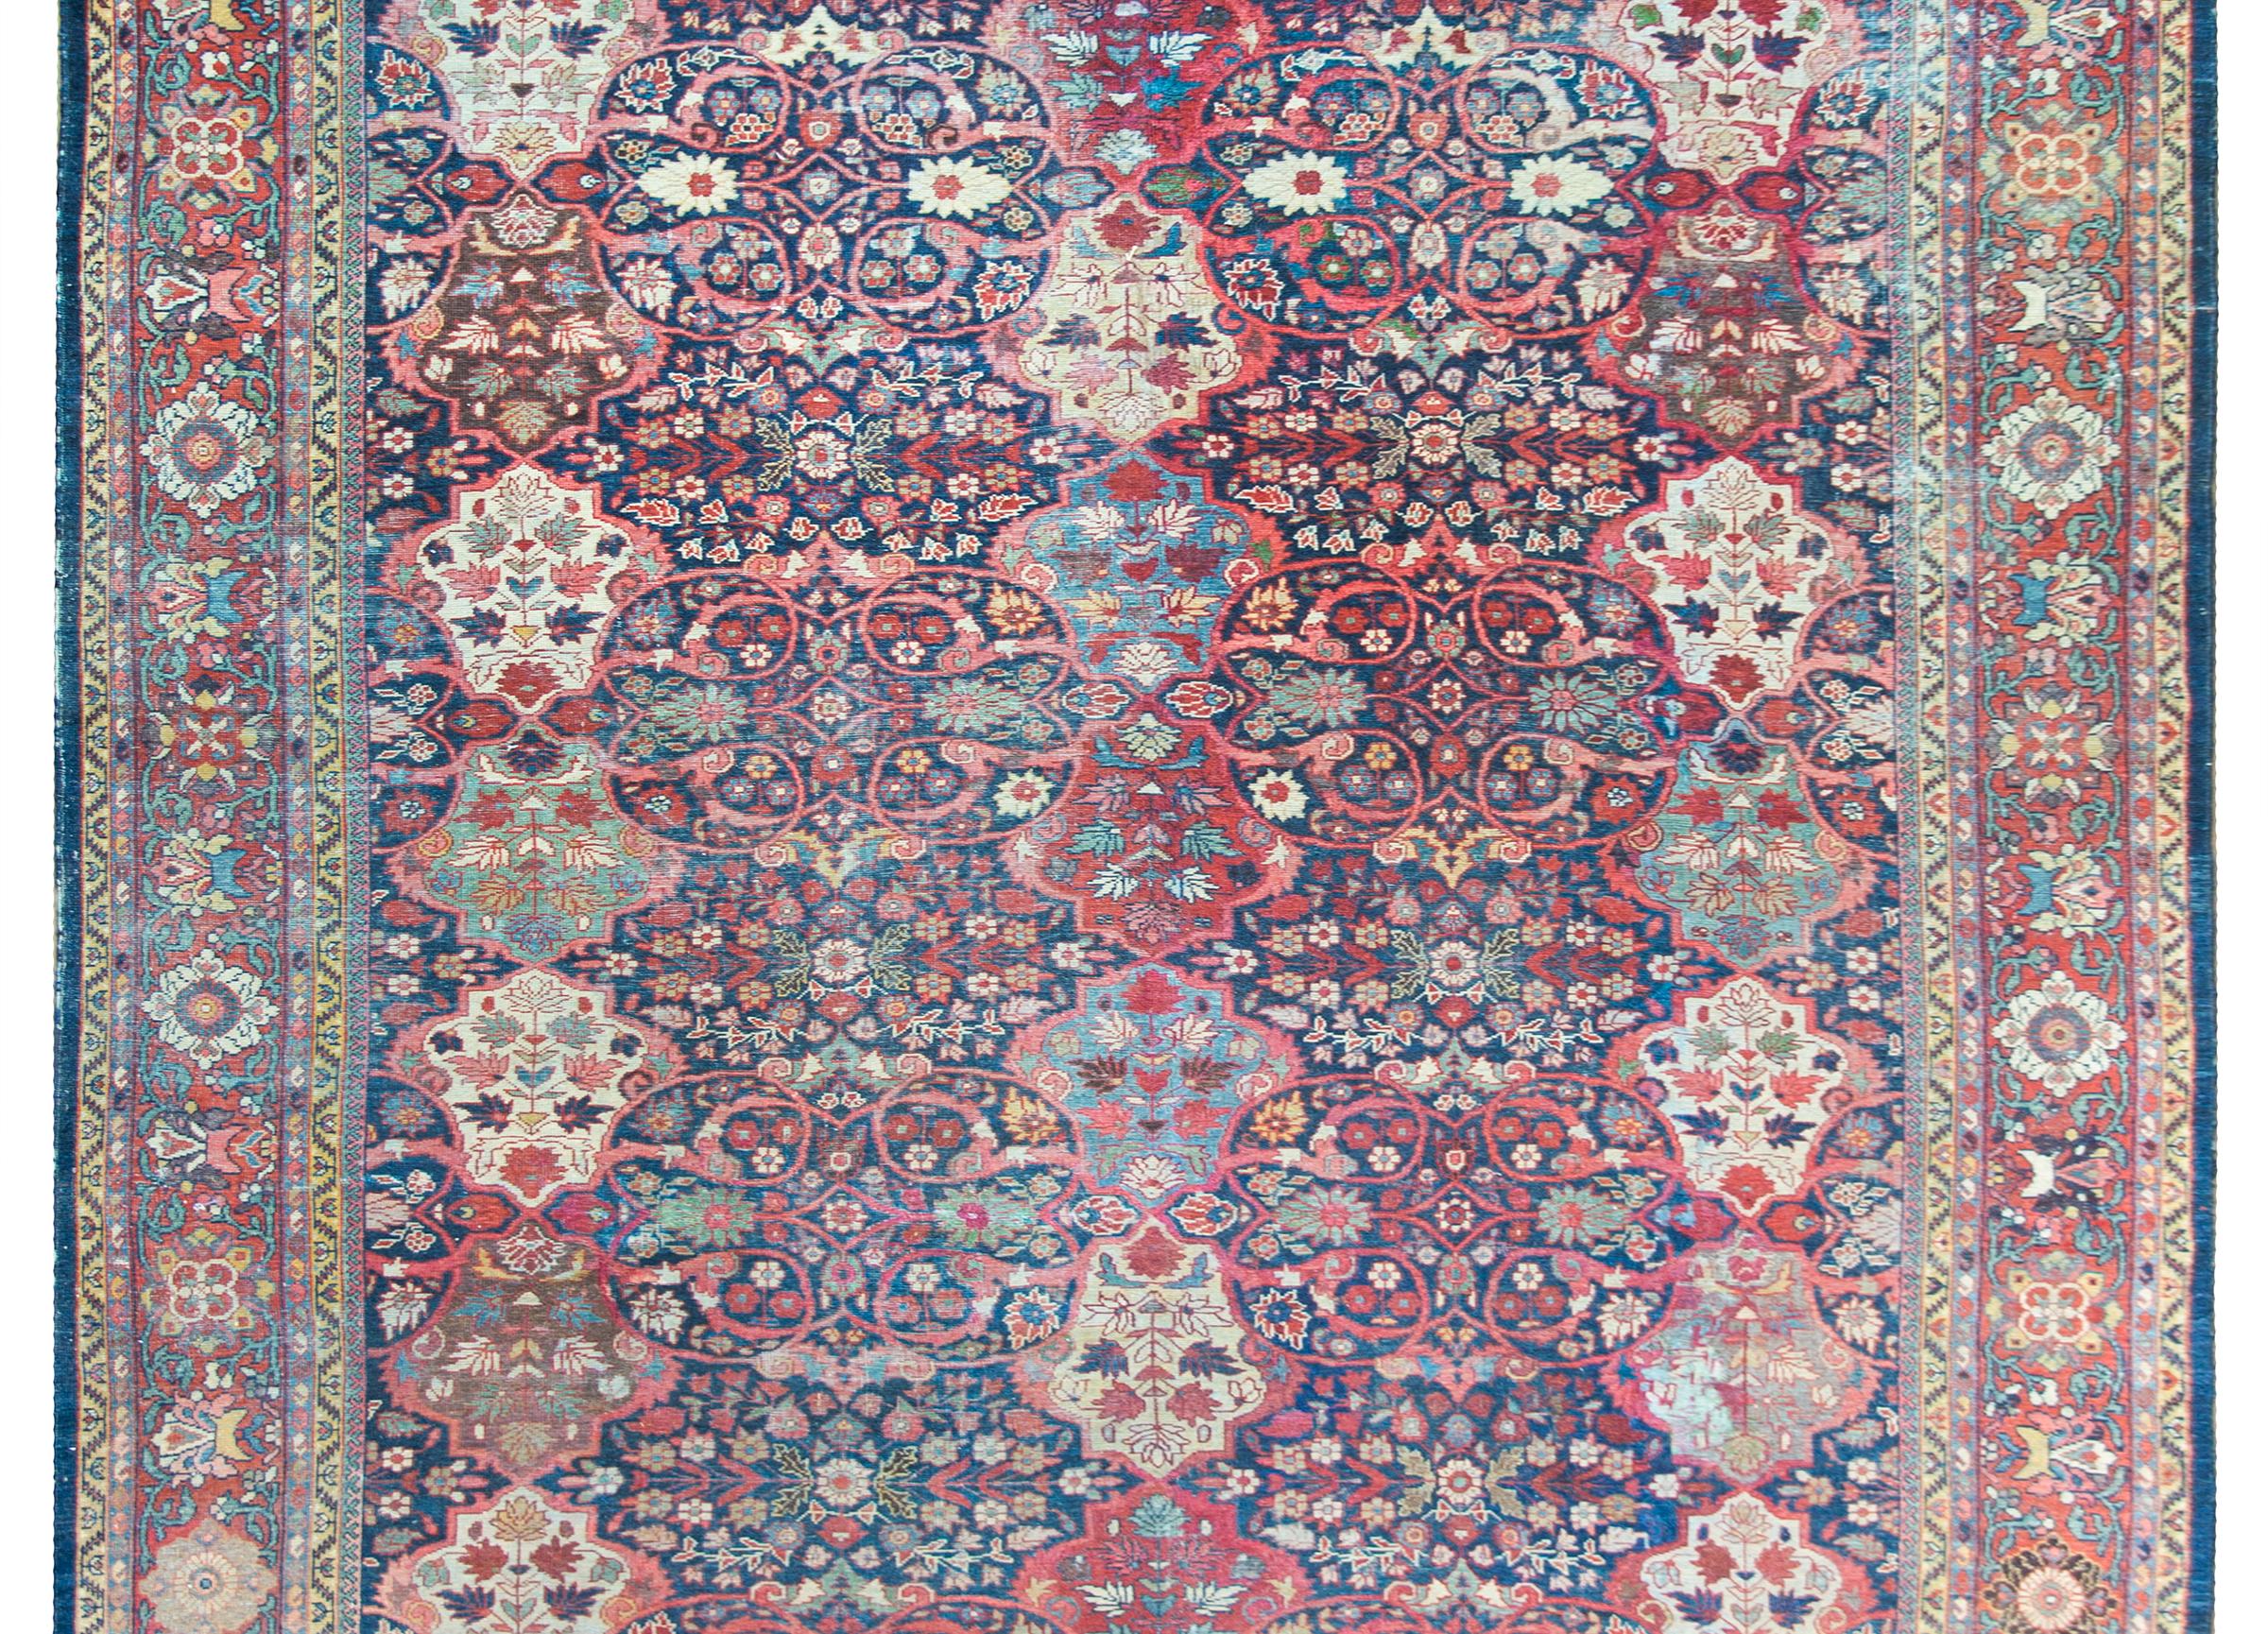 A gorgeous early 20th century Persian Mahal rug with the most wonderful floral pattern containing myriad large floral medallions living amidst a field of more stylized flowers and scrolling vines, woven in crimson teal, pink, white, indigo, and